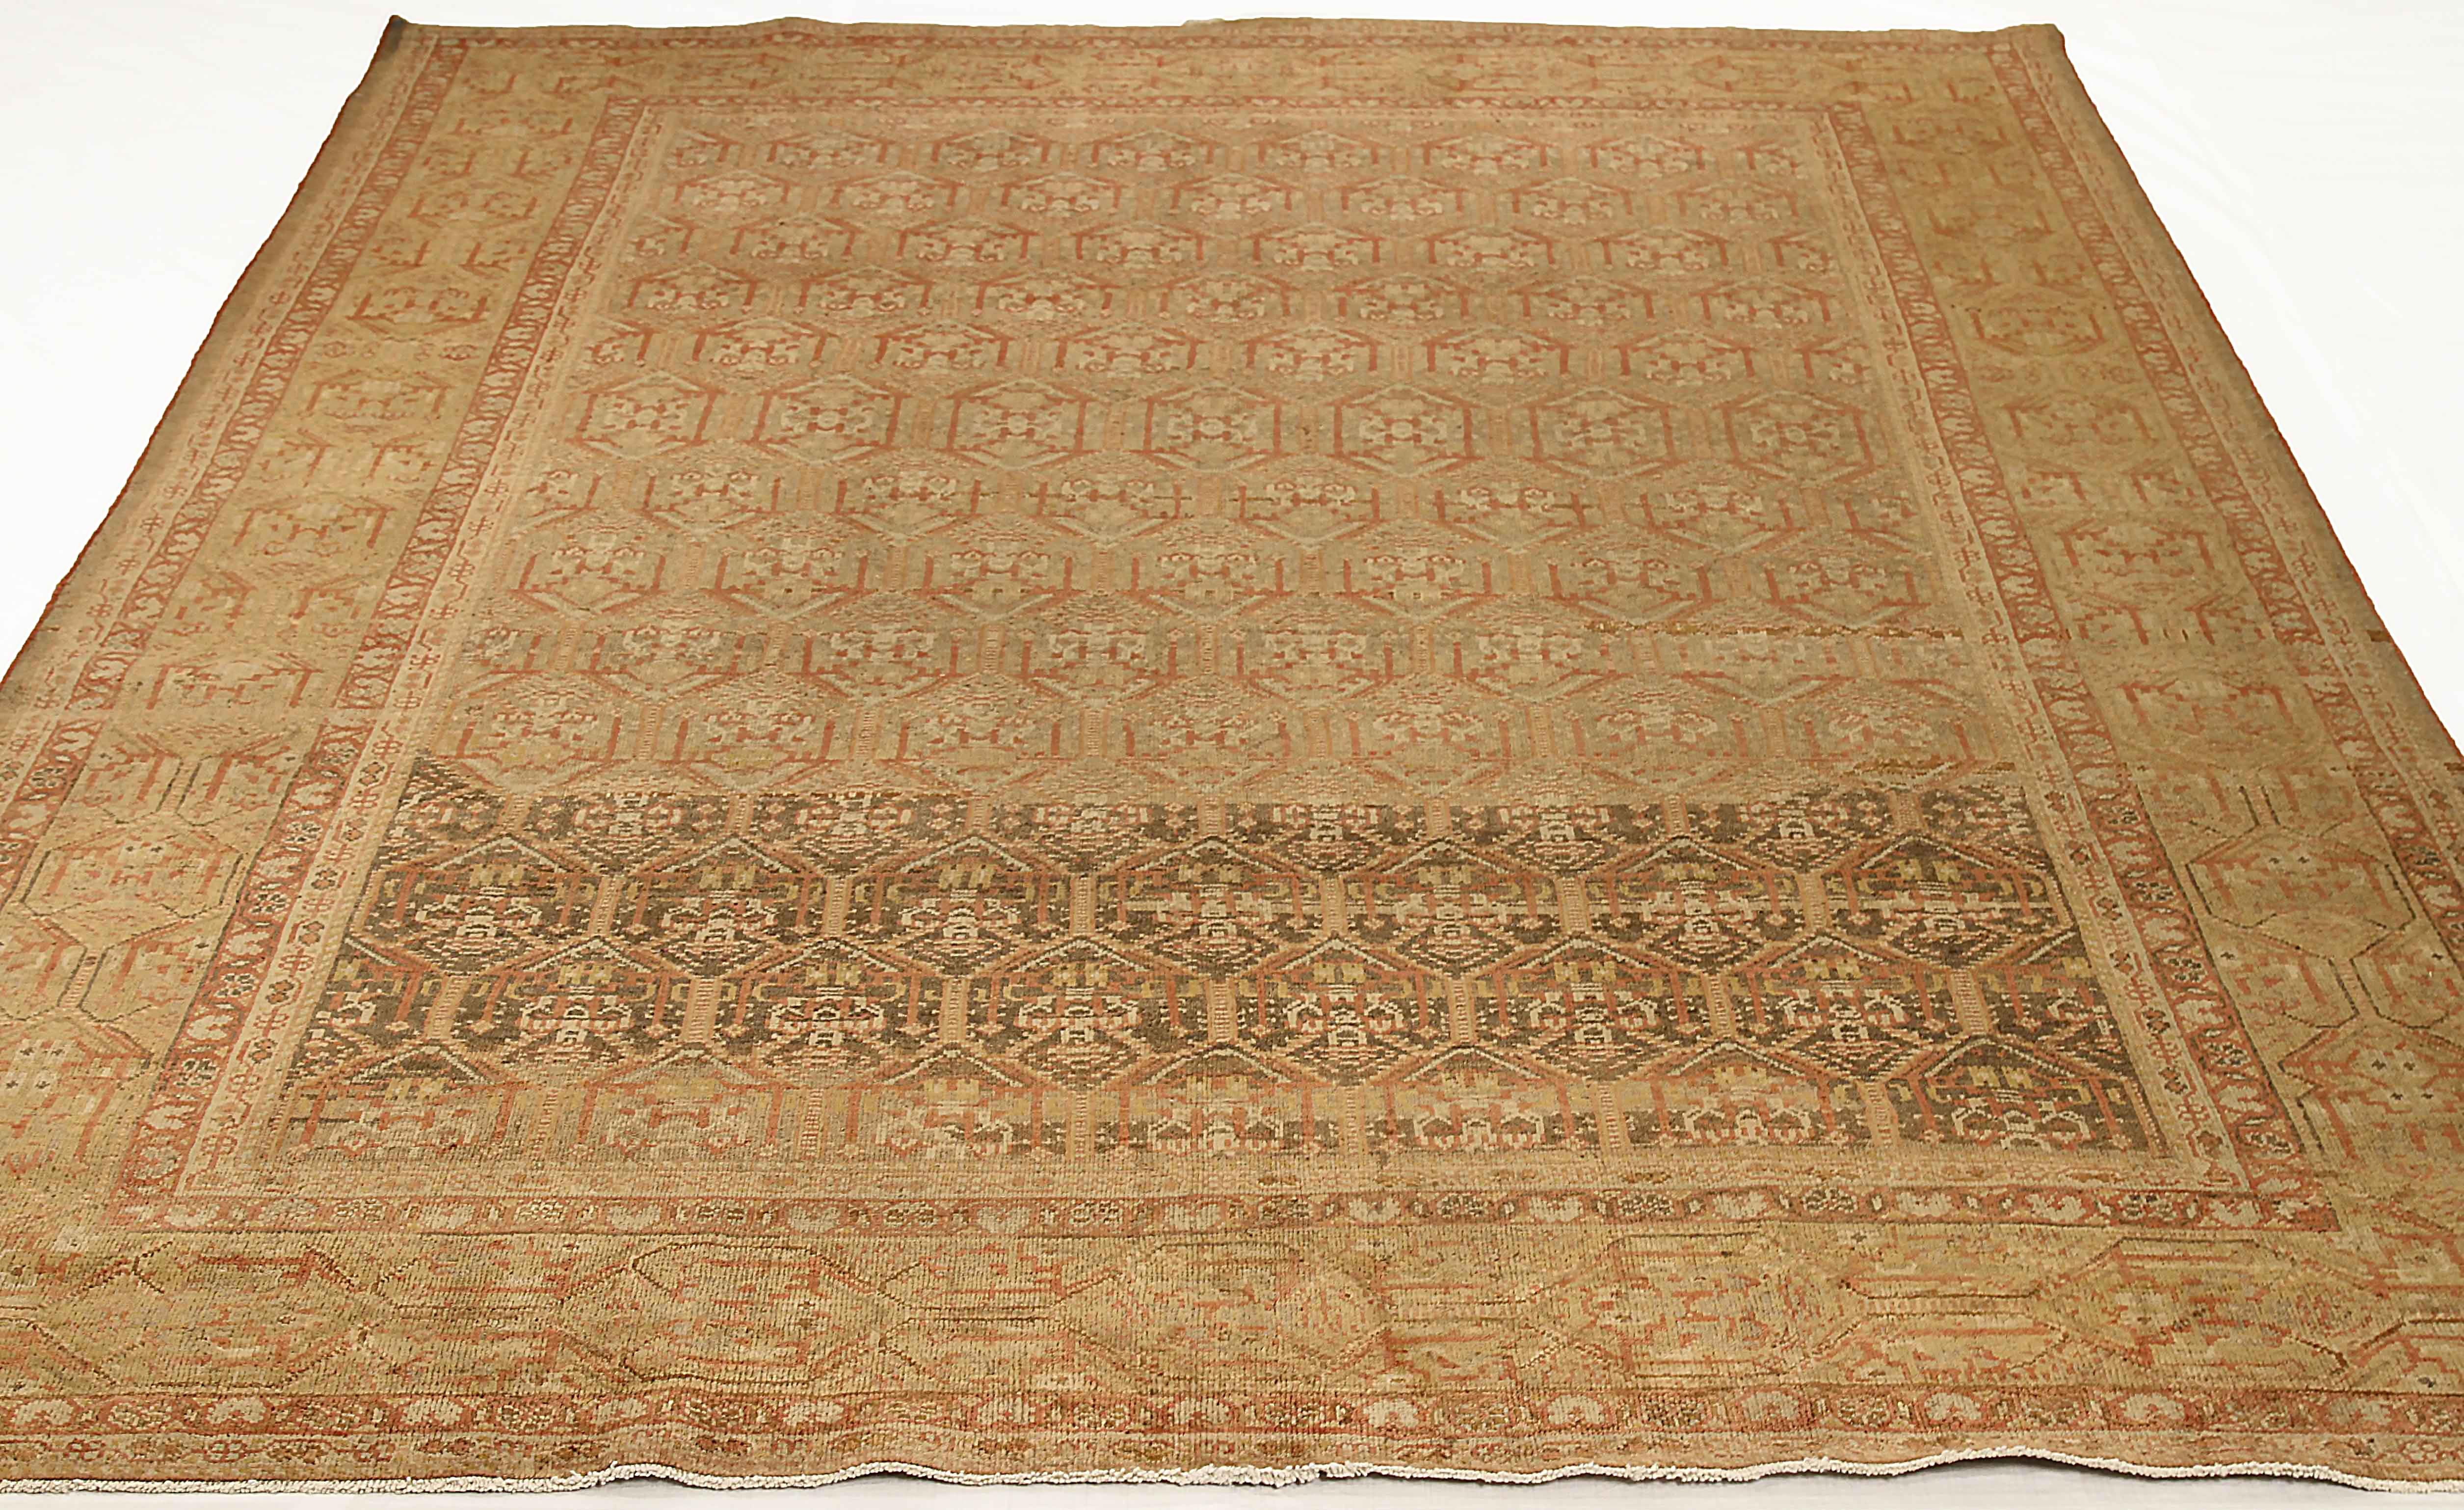 Antique Persian area rug handmade from the highest quality of sheep’s wool. It’s colored with eco-friendly vegetable dyes that are safe for humans and pets alike. It’s a traditional Mahal design handwoven by expert artisans. It’s a lovely runner rug